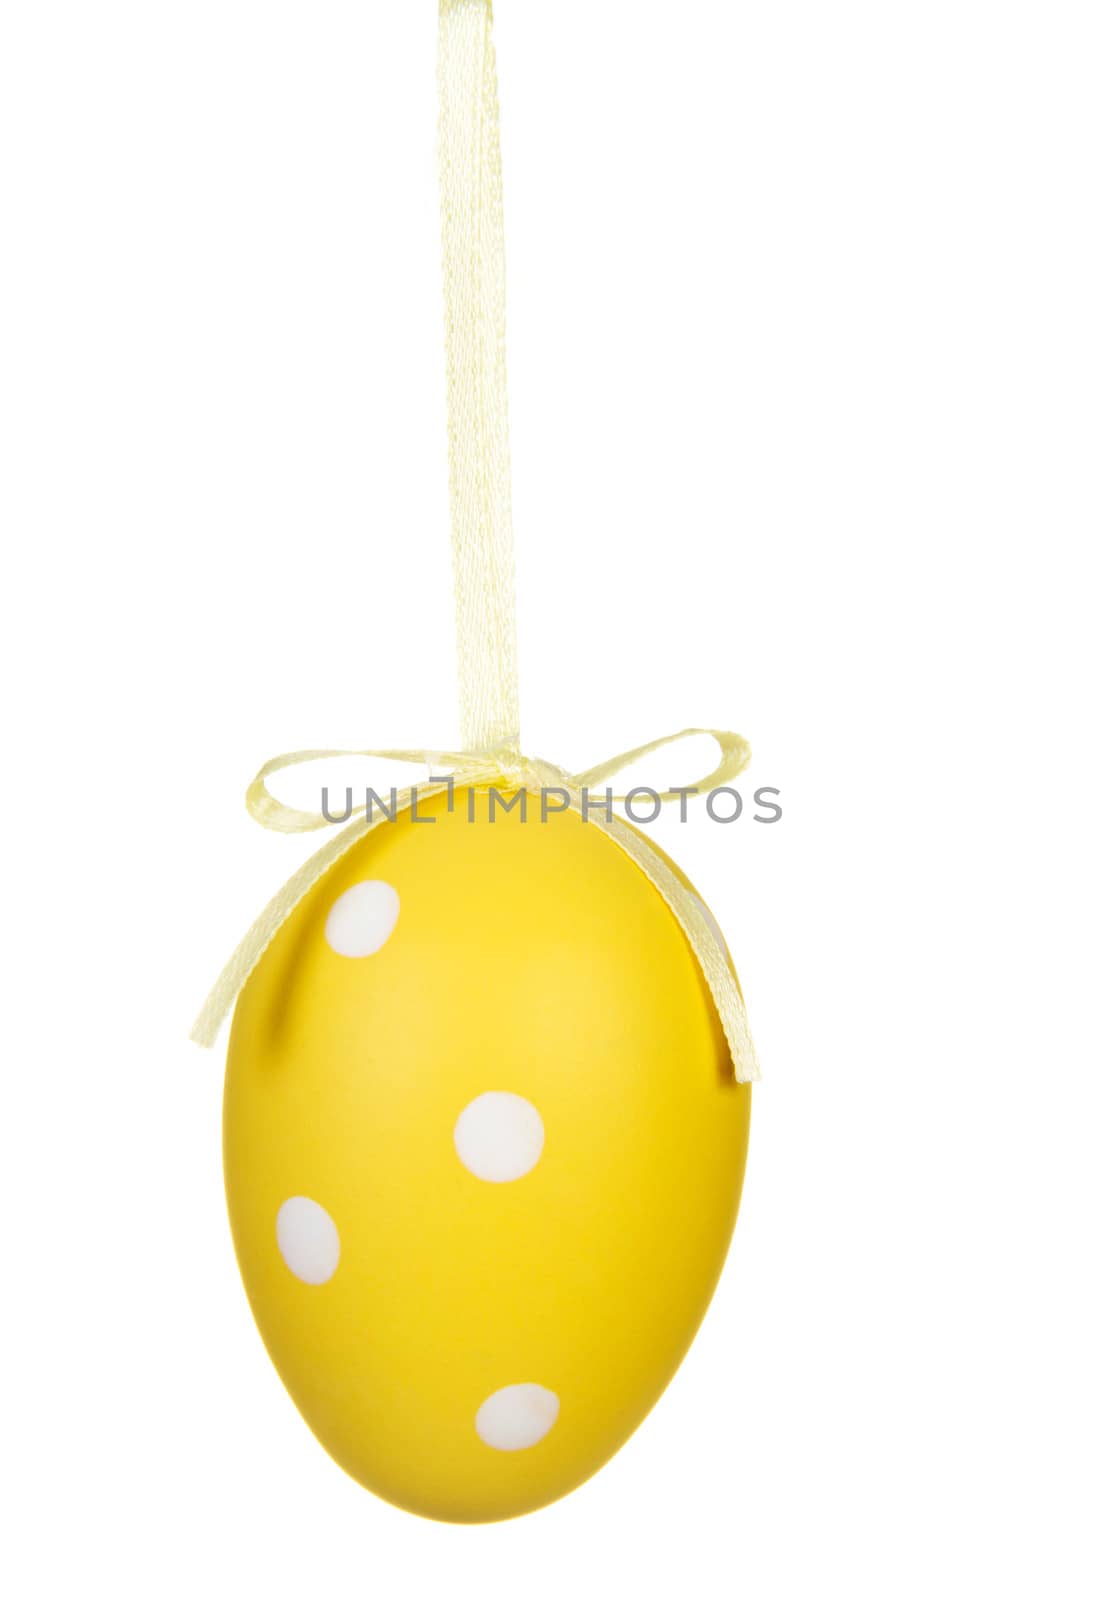 One separated Easter egg handng, decoration. Isolated on white.